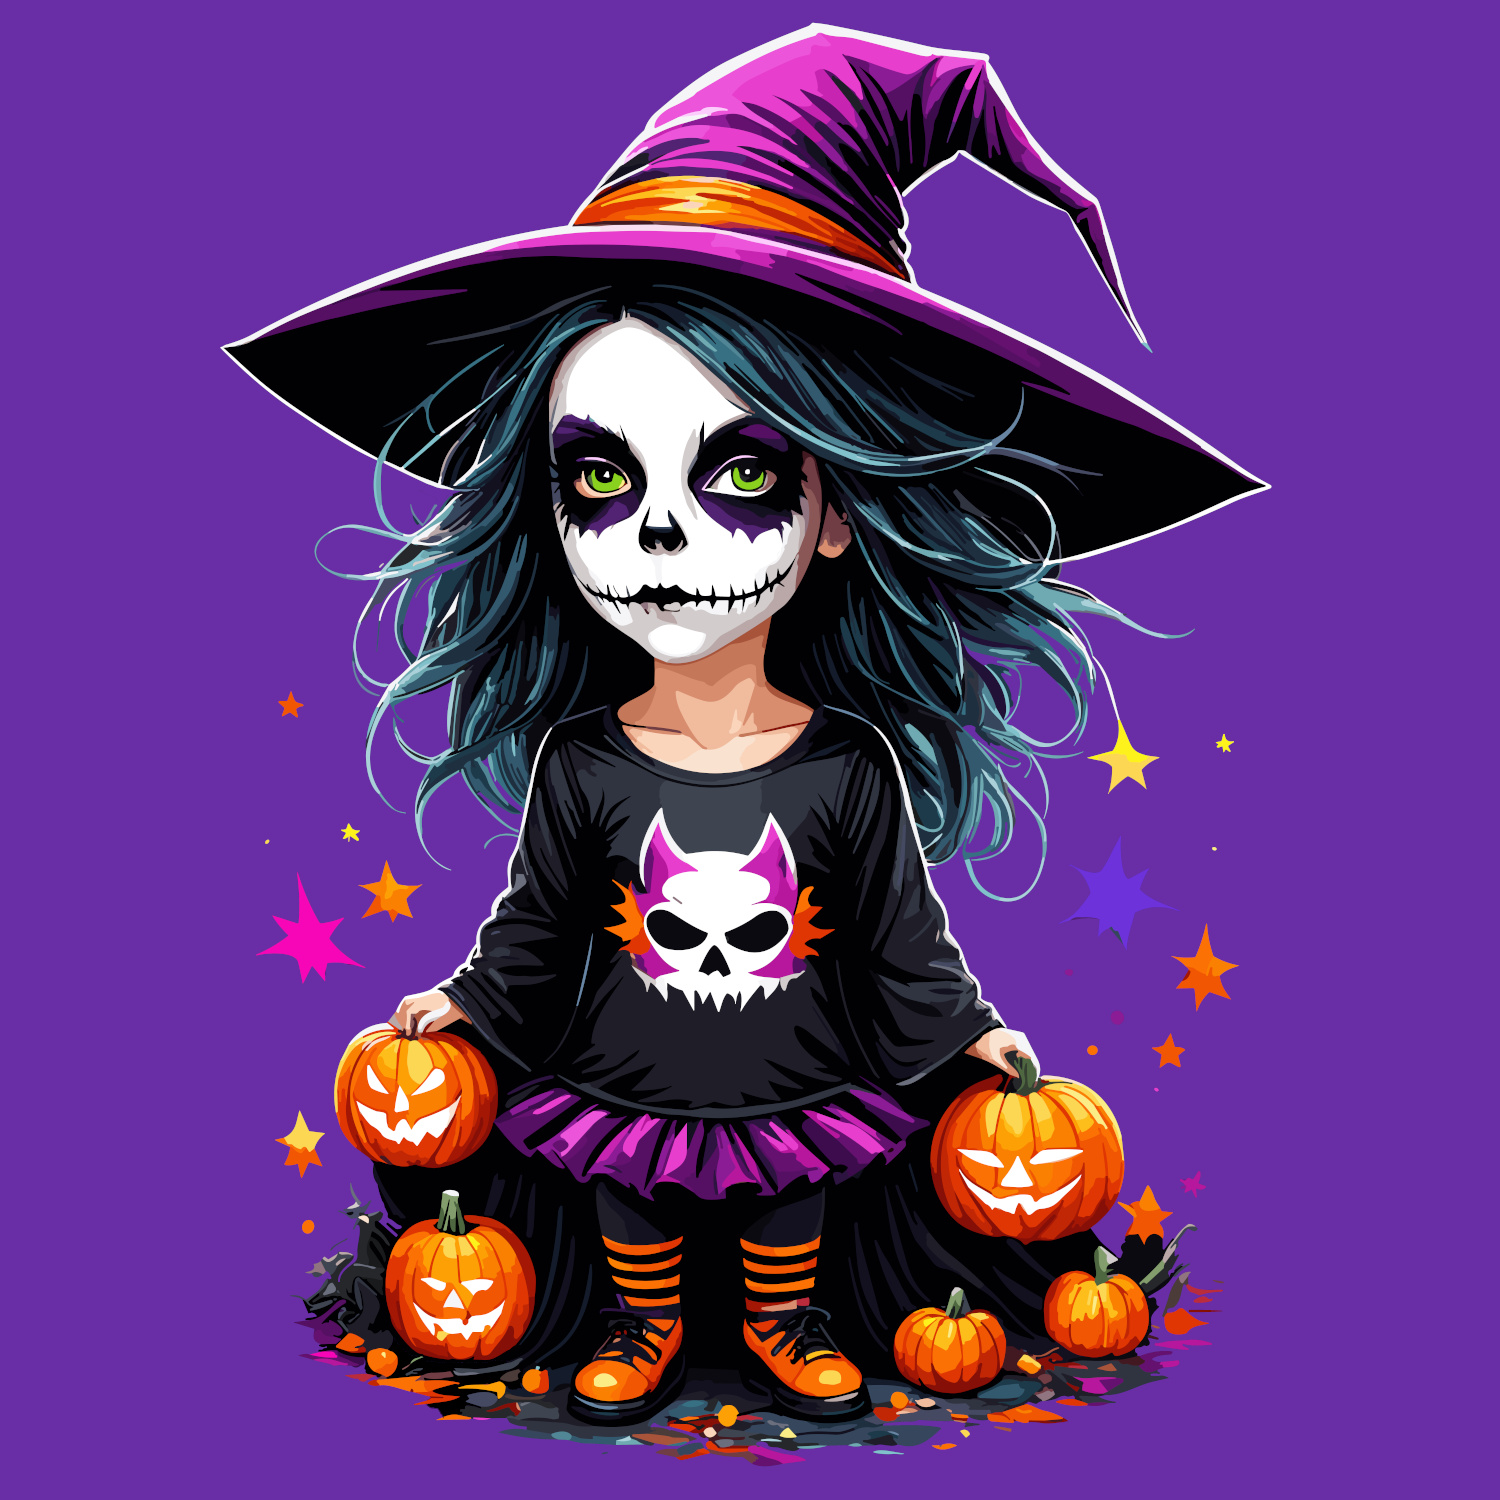 Cute Adorable Kawaii Halloween Witch Double, double toil and trouble, this cute witch is anything but subtle!